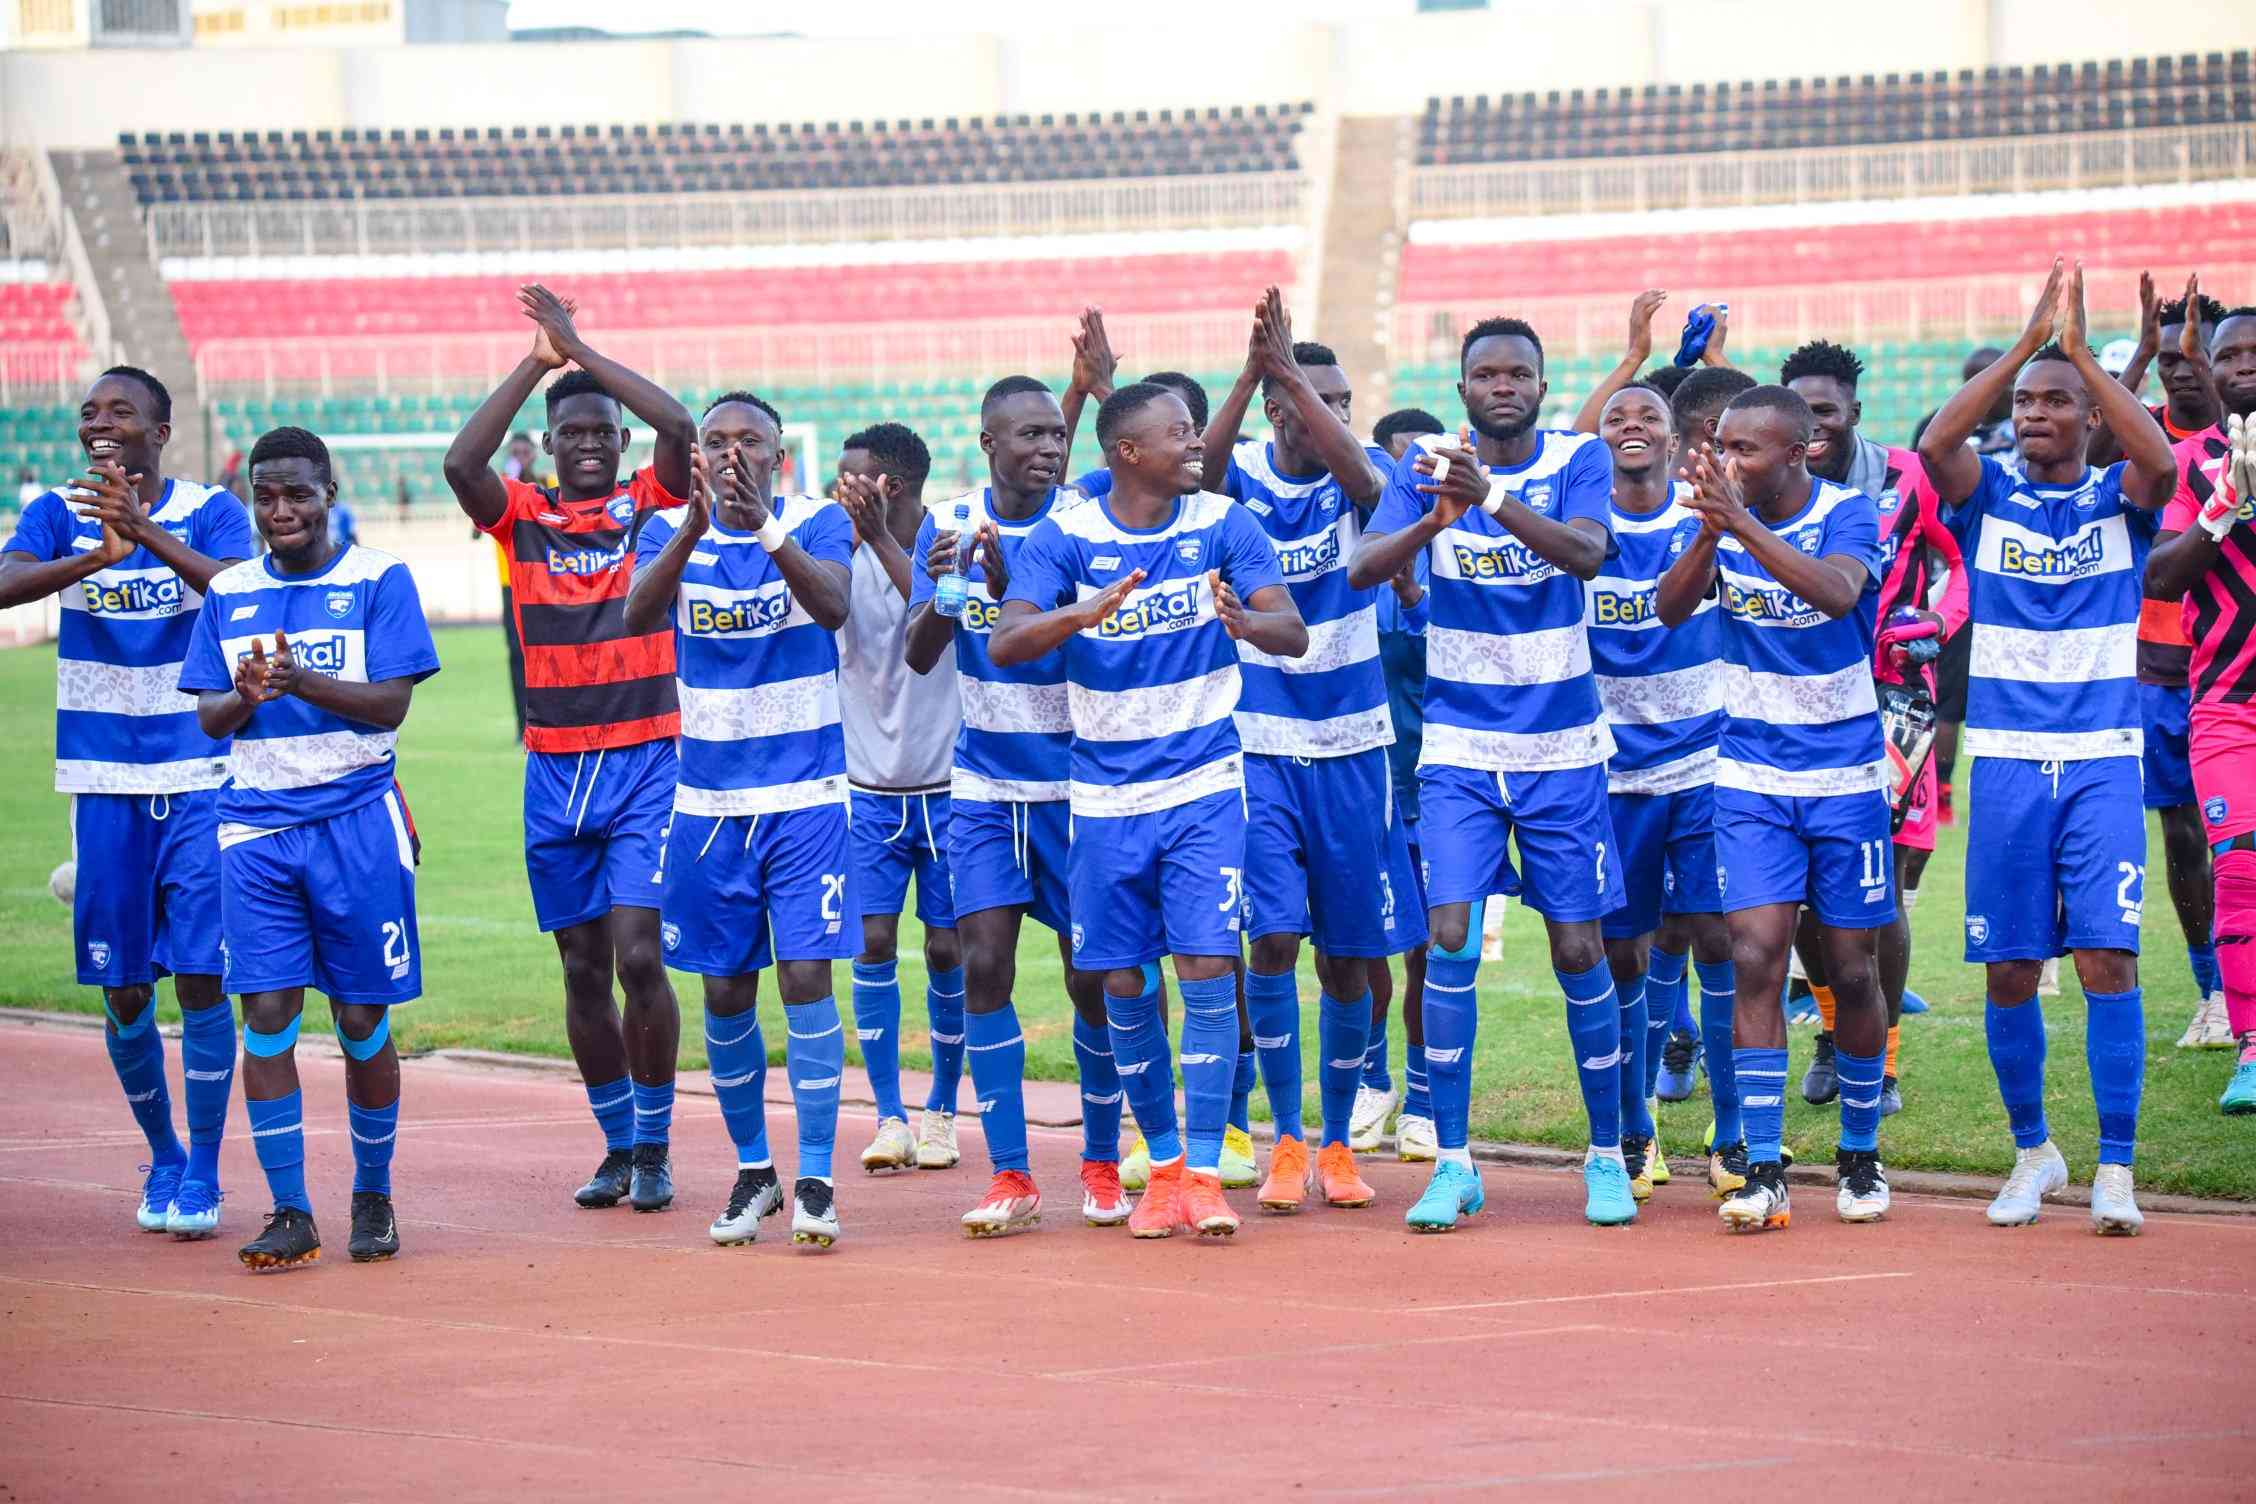 From relegation fears to top four contenders: AFC Leopards' remarkable turnaround